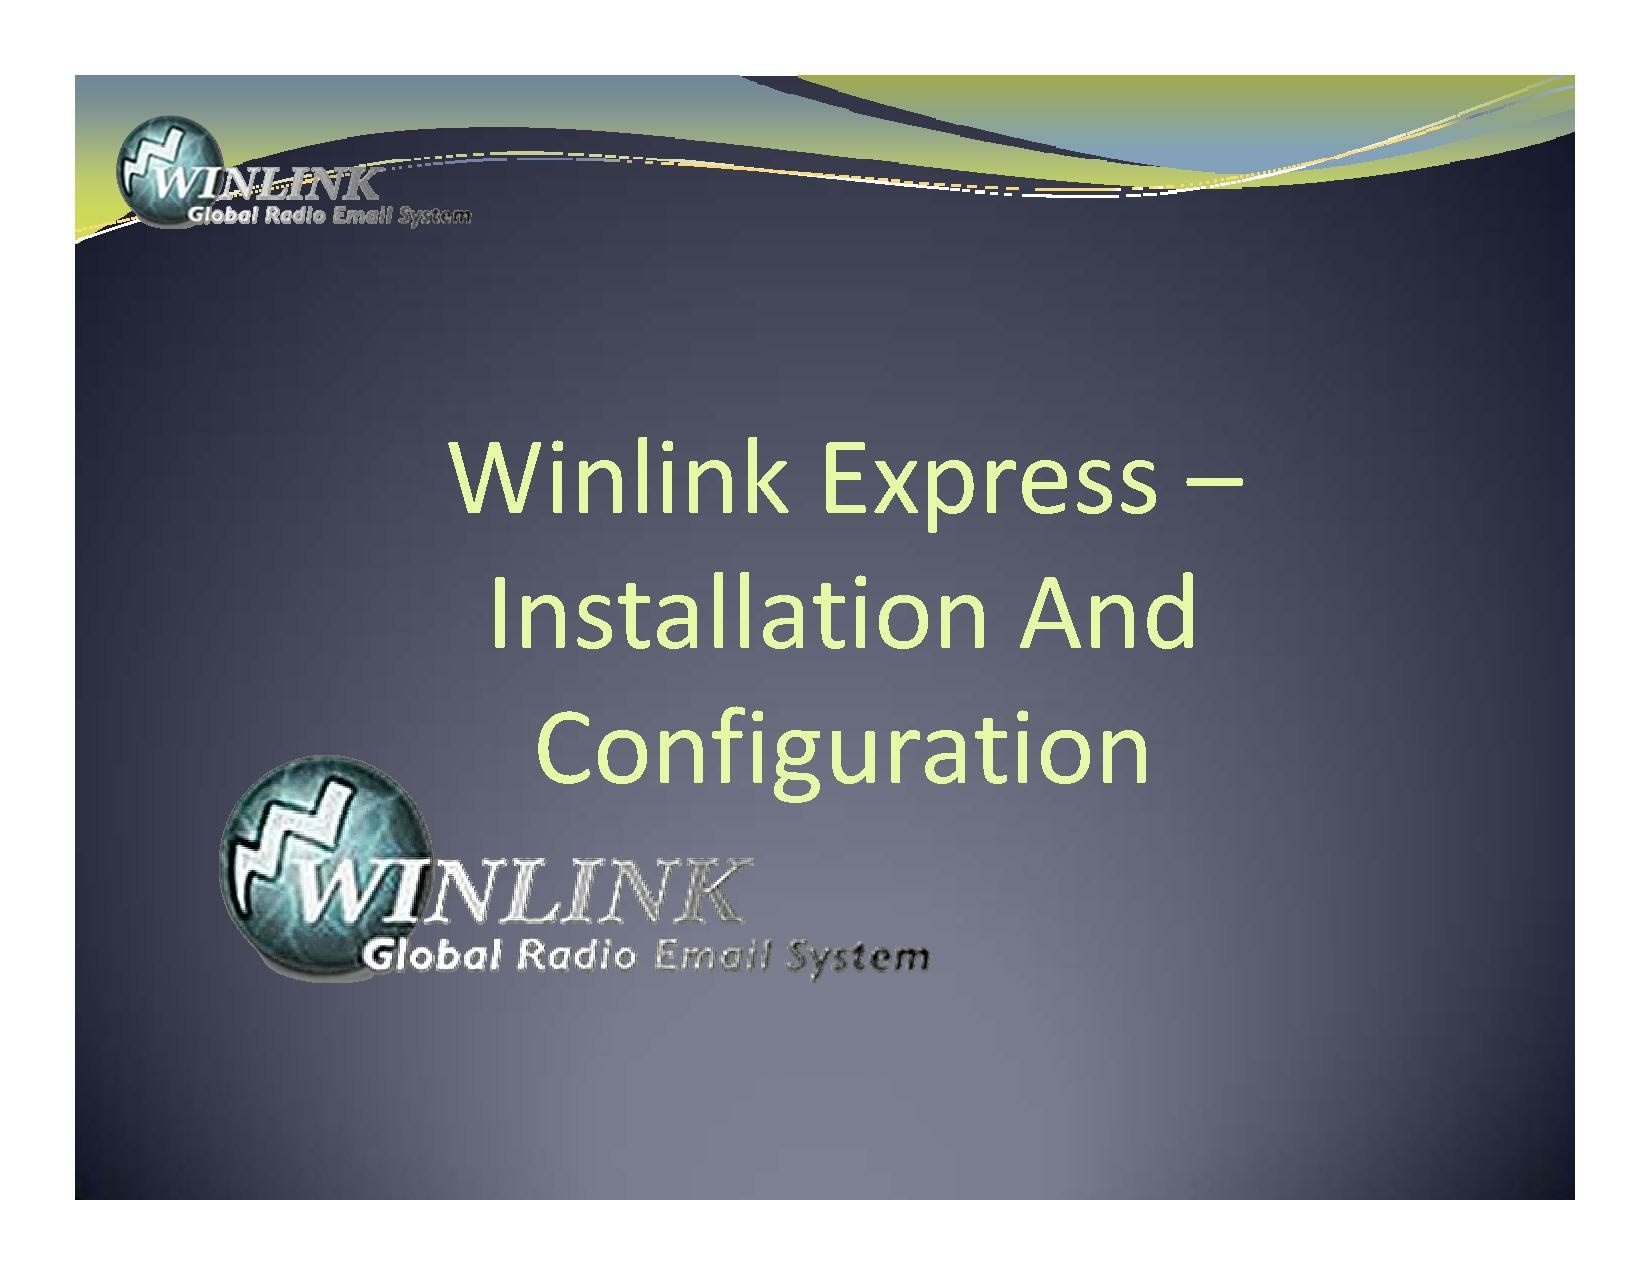 14-Winlink Express Install and Configure-Currie.pdf